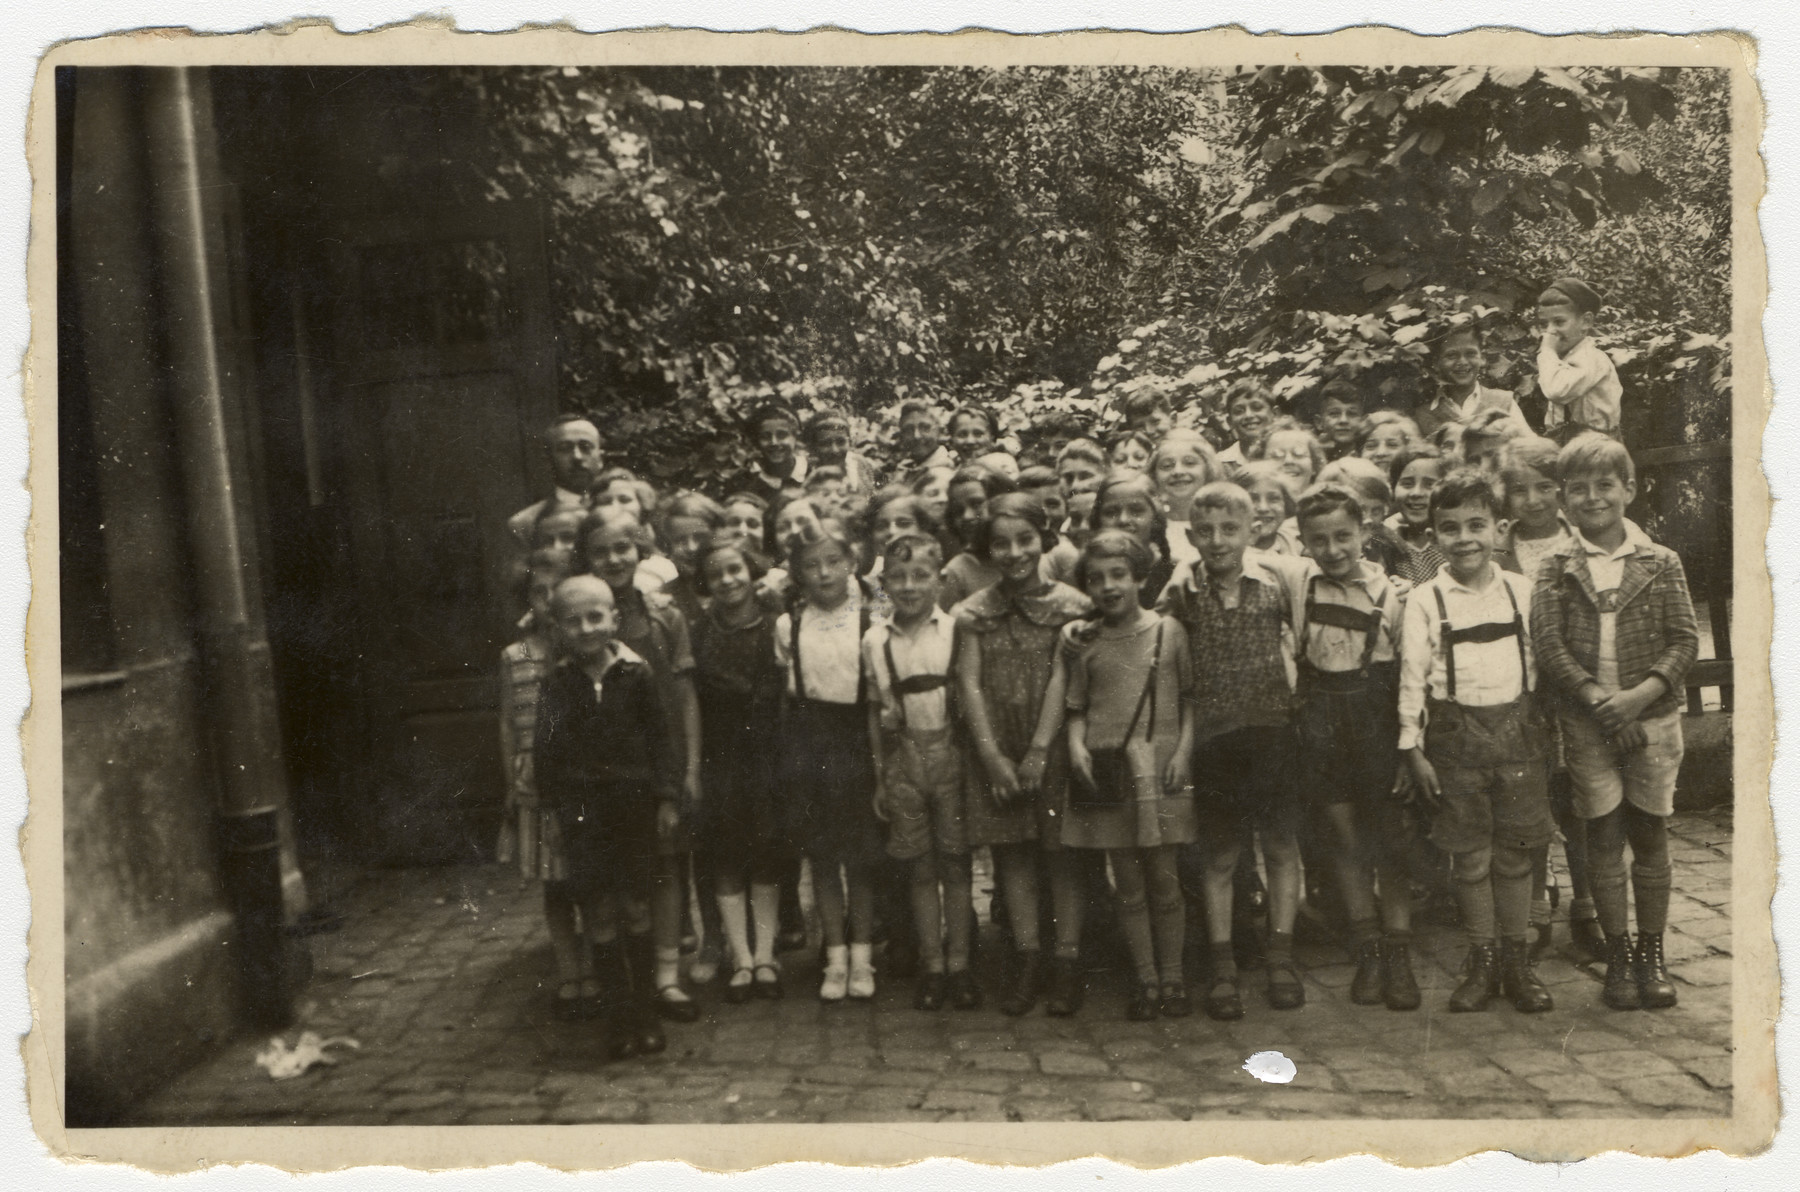 Group portrait of a second grade class in a religious elementary school in Nuremberg, Germany.

Among those pictured is Meir Schwarz, front row, fourth from the left.  Standing behind him is the teacher Mr. Blum.